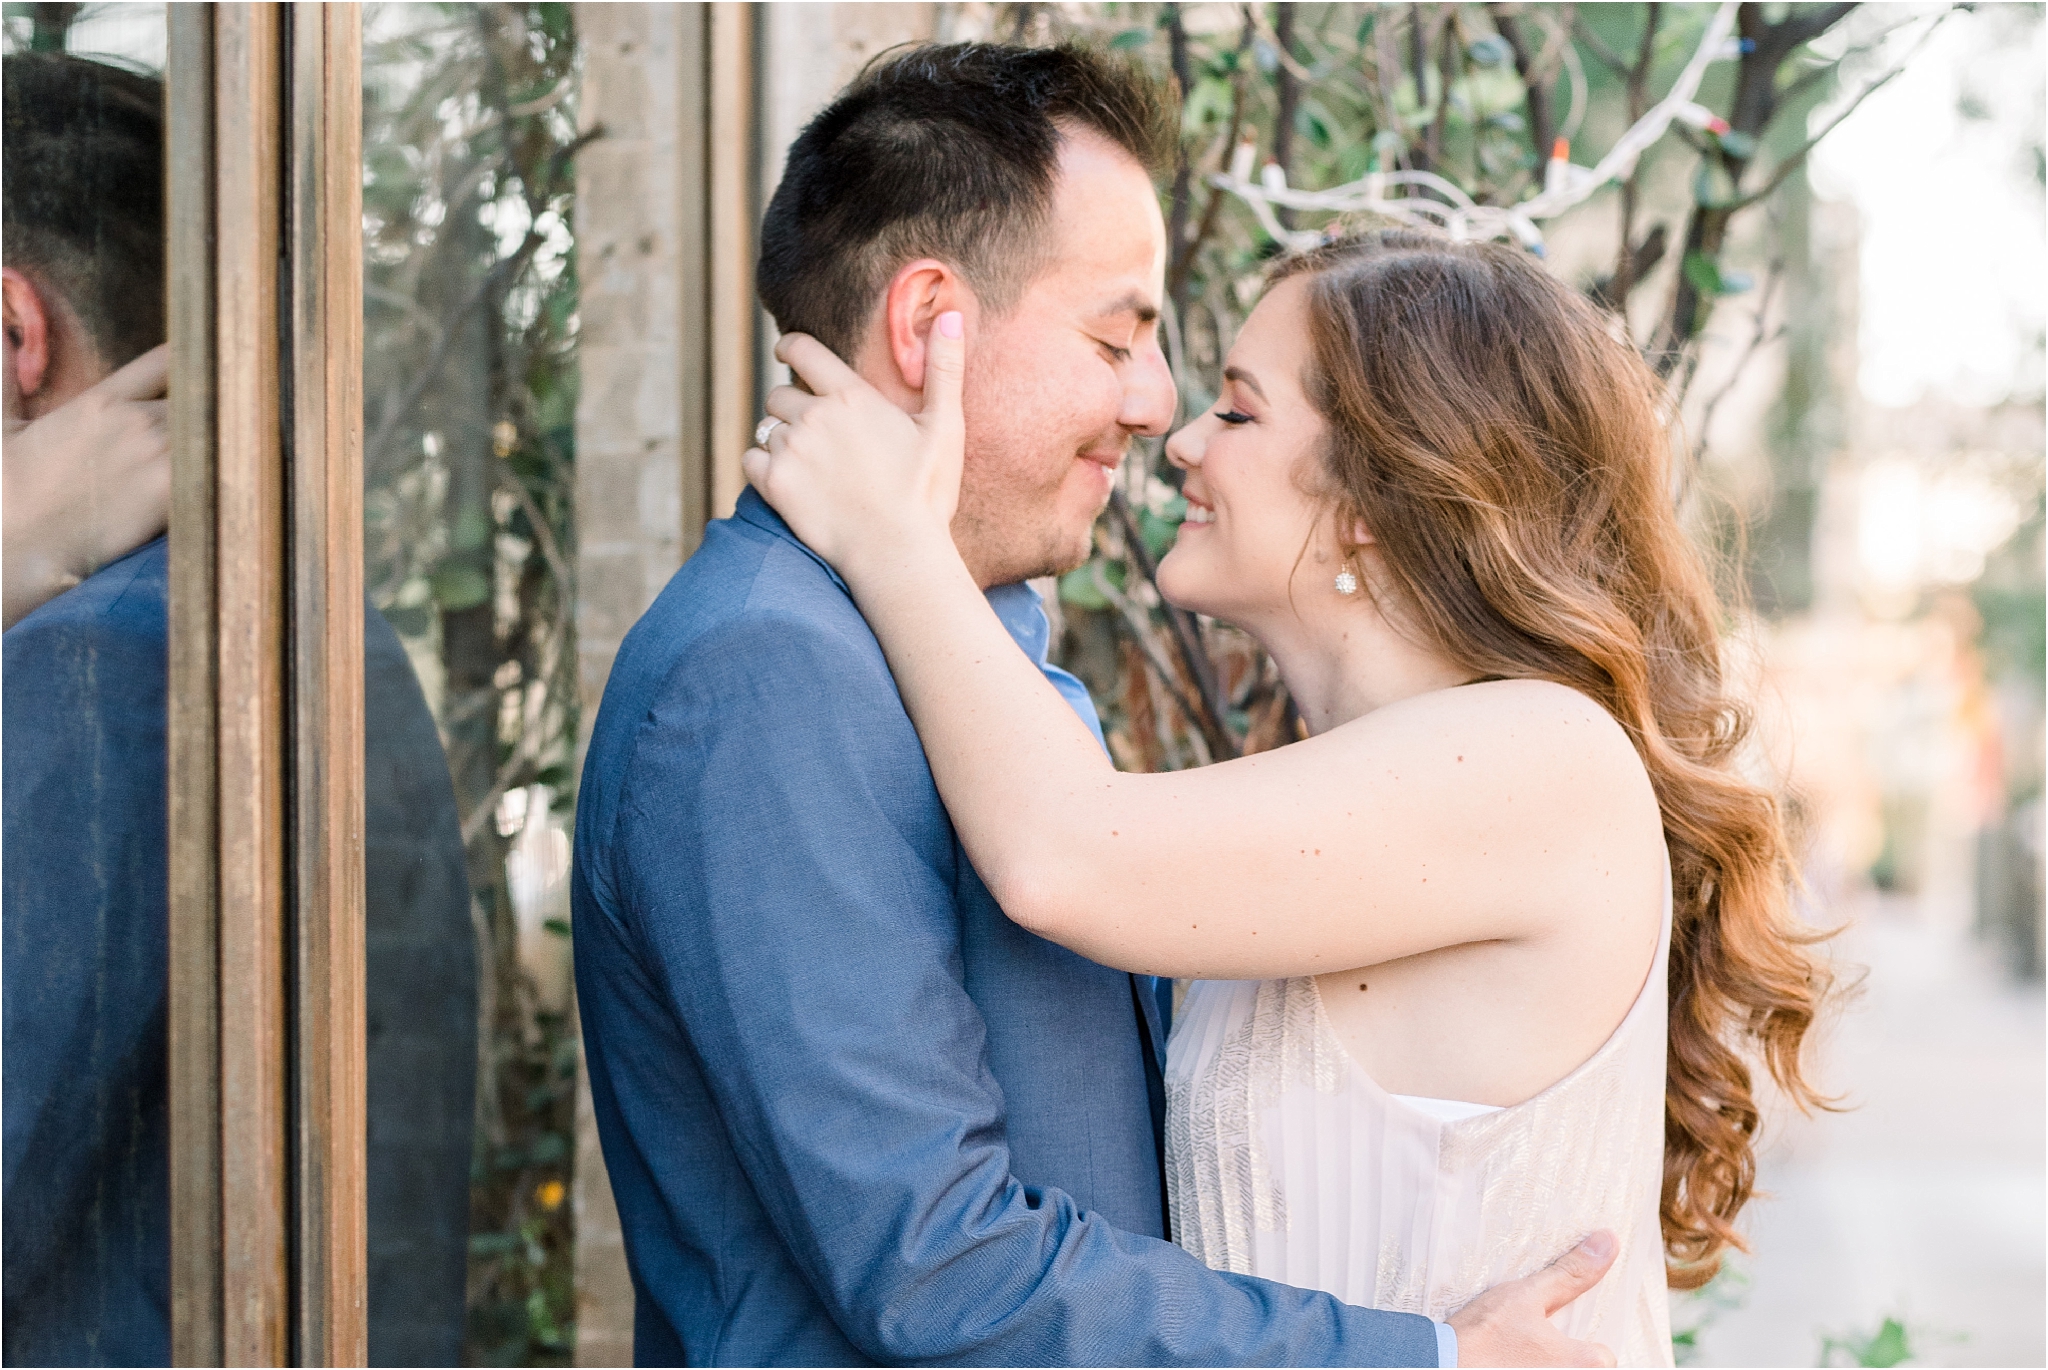 Sentinel Peak and Downtown Tucson Engagement Photos by Tucson Wedding Photographer | West End Photography